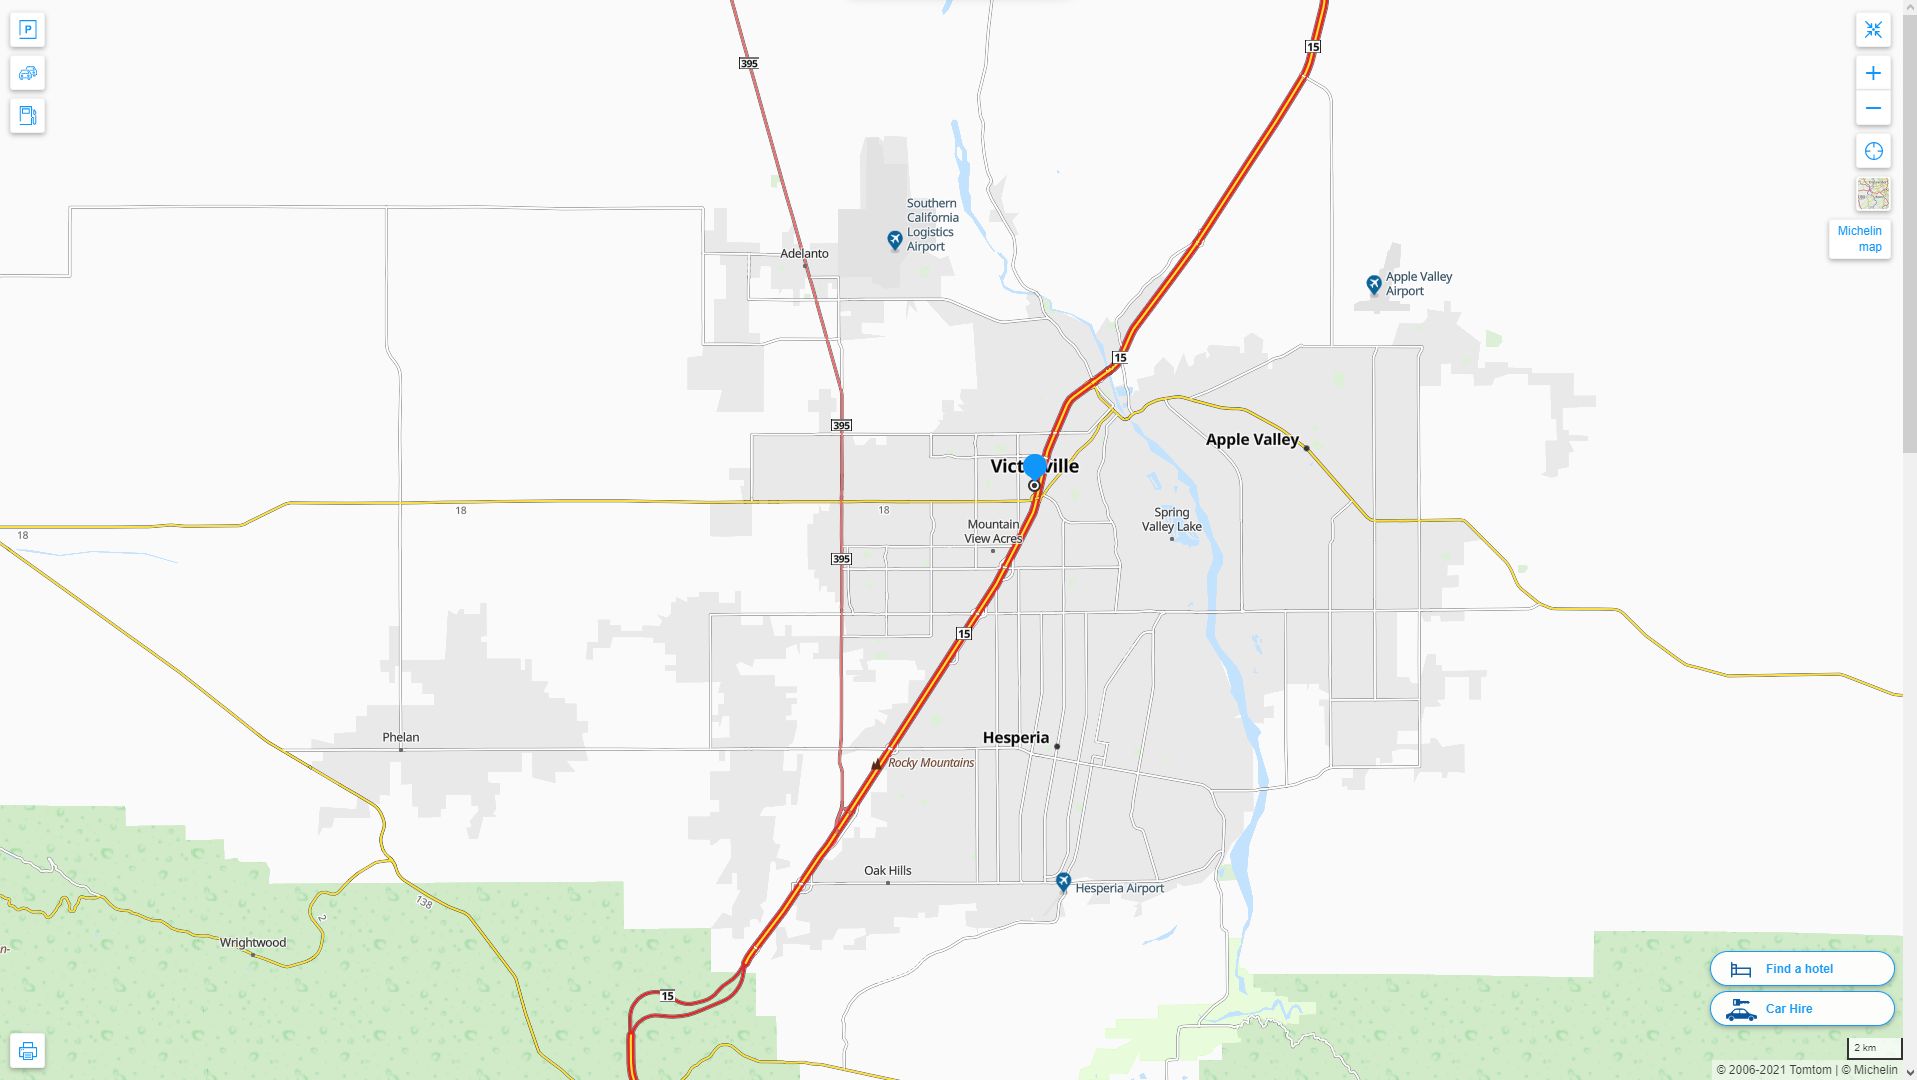 Victorville California Highway and Road Map